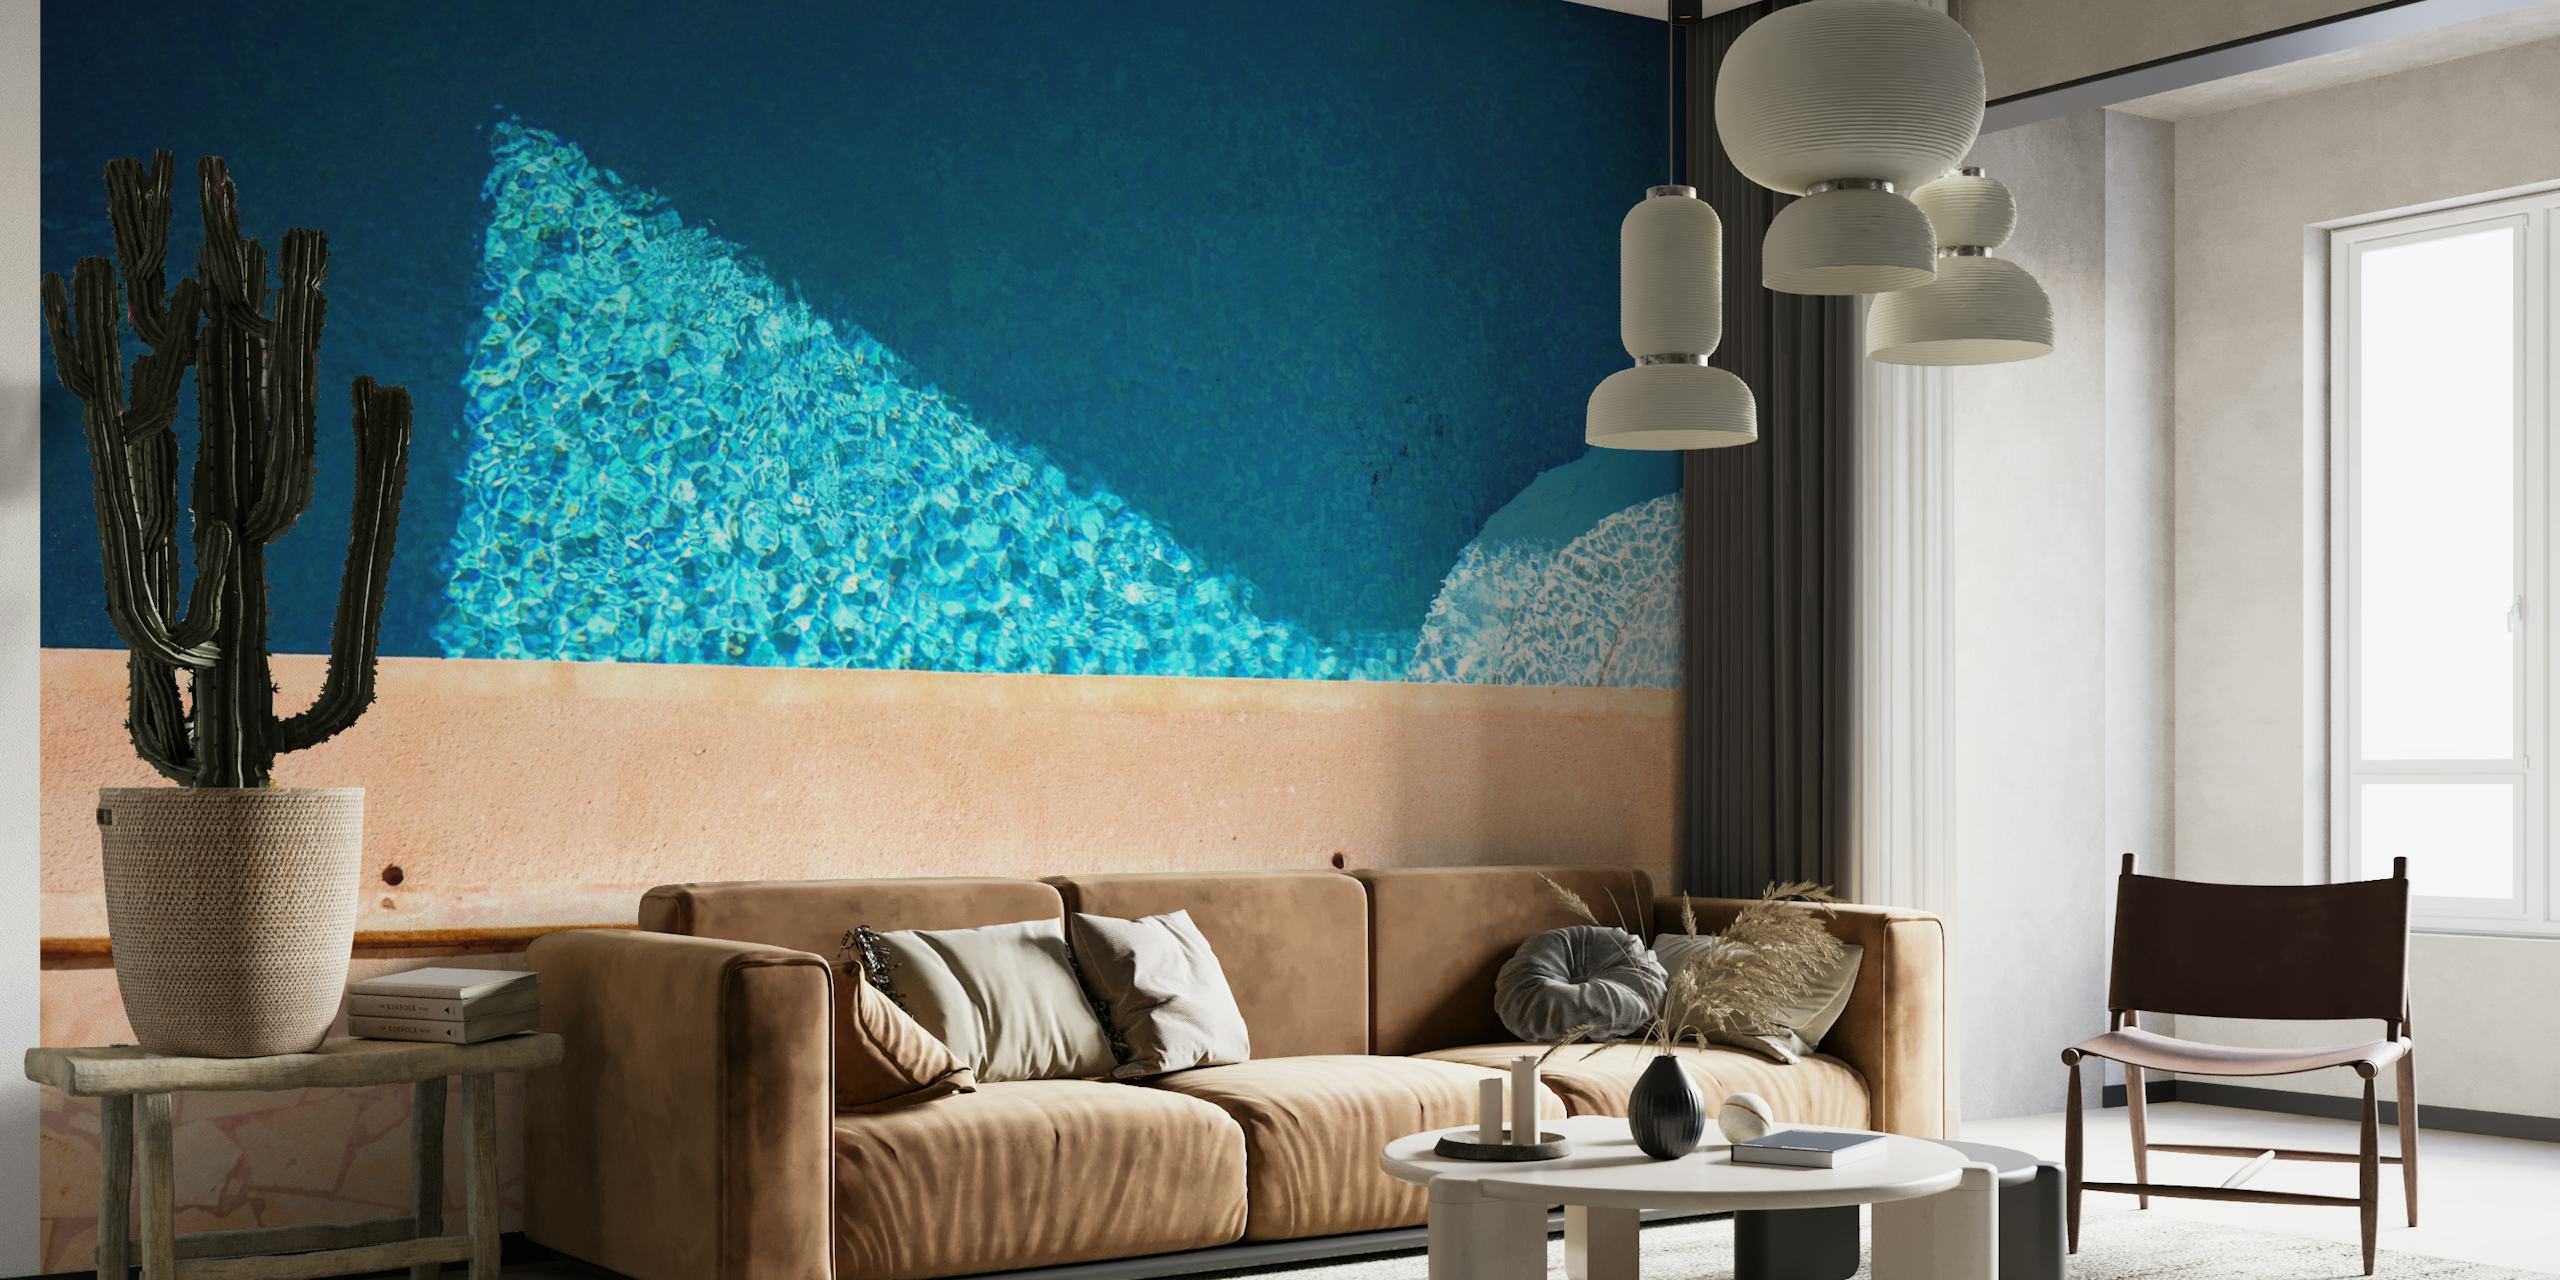 California Pool Dream wall mural depicting the cool blue waters of a pool with terra cotta tiles